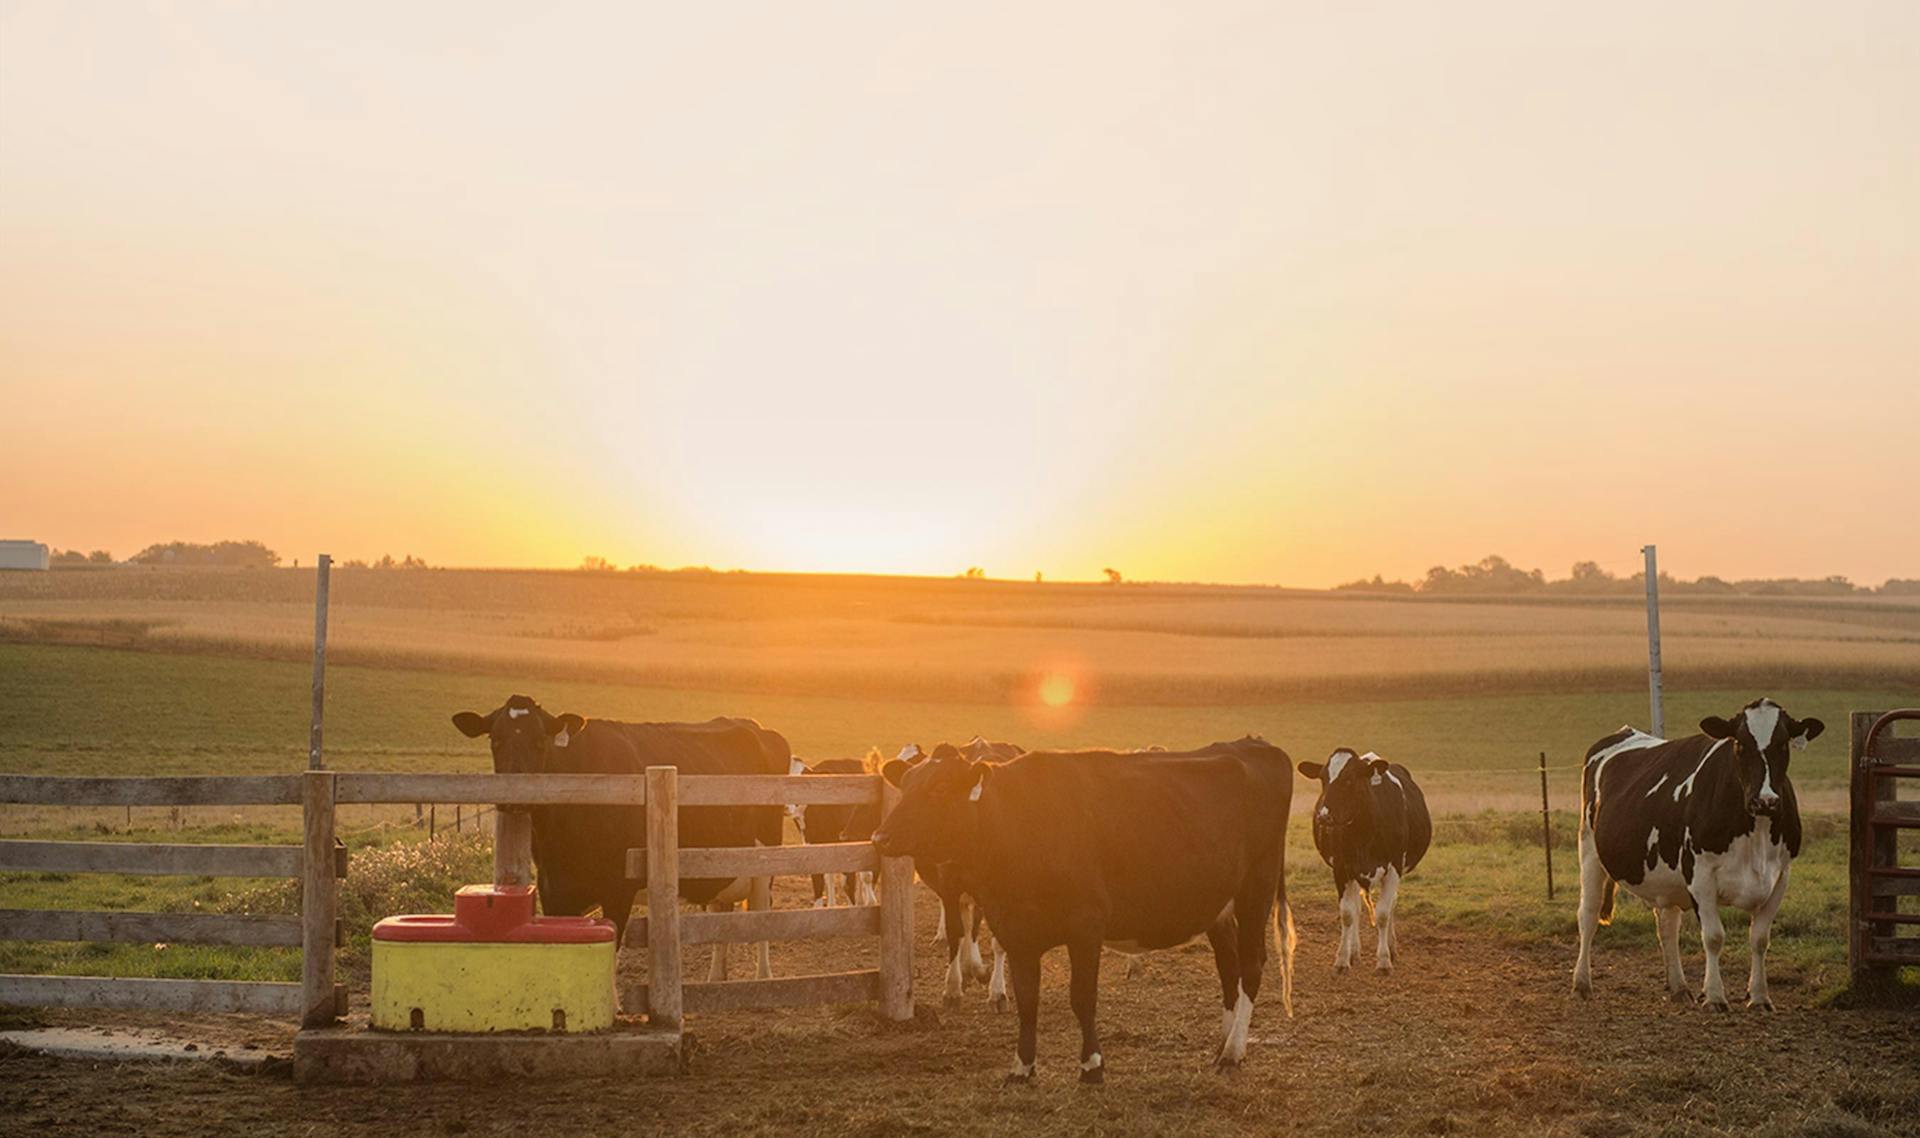 Cows on a farm during sunset.